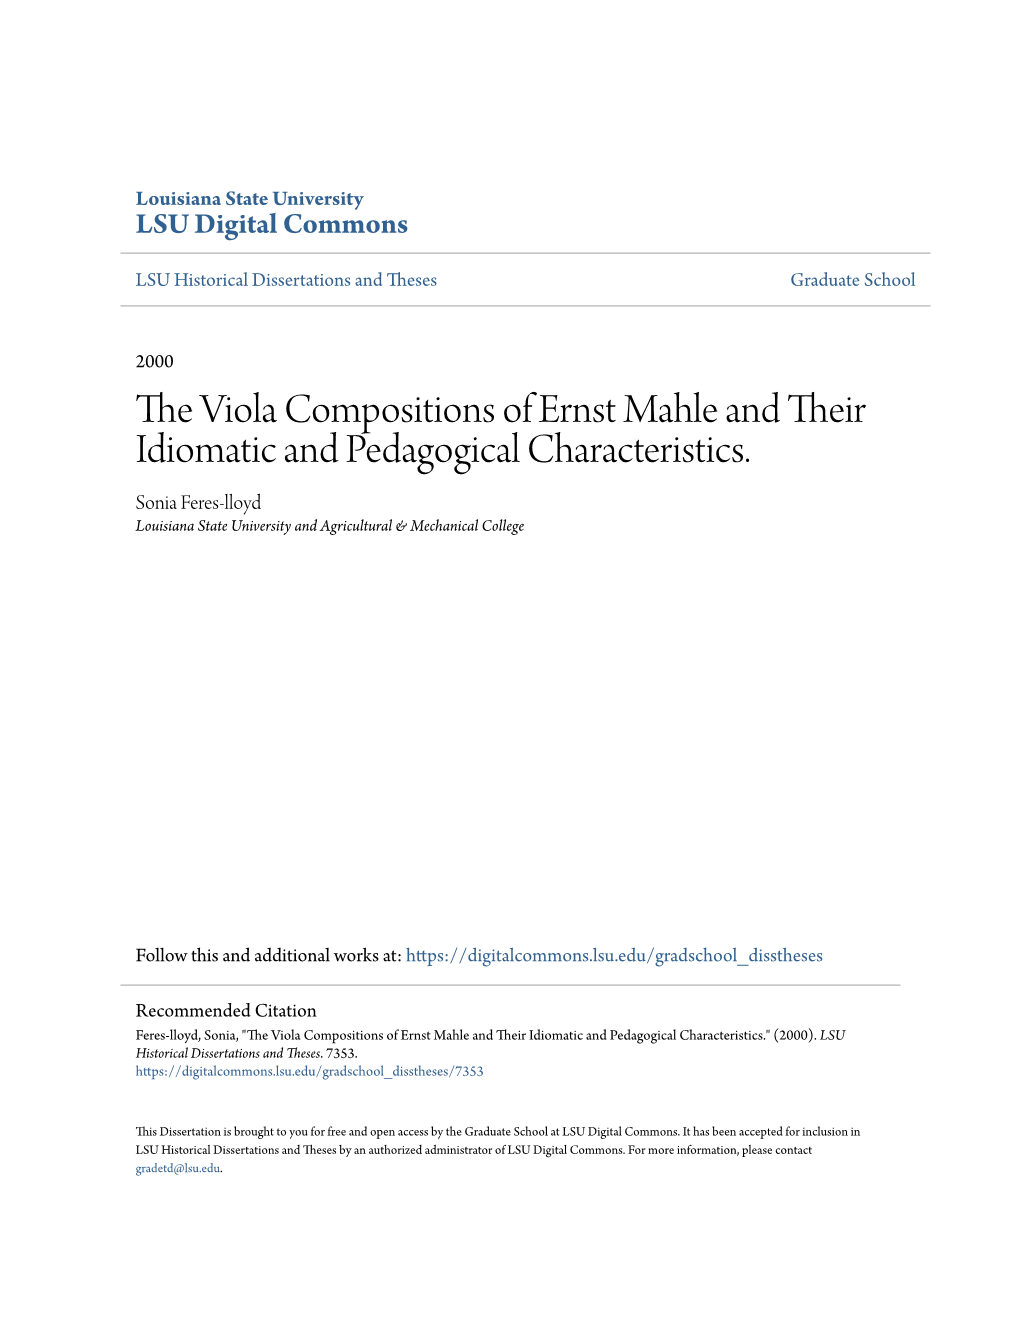 The Viola Compositions of Ernst Mahle and Their Idiomatic and Pedagogical Characteristics